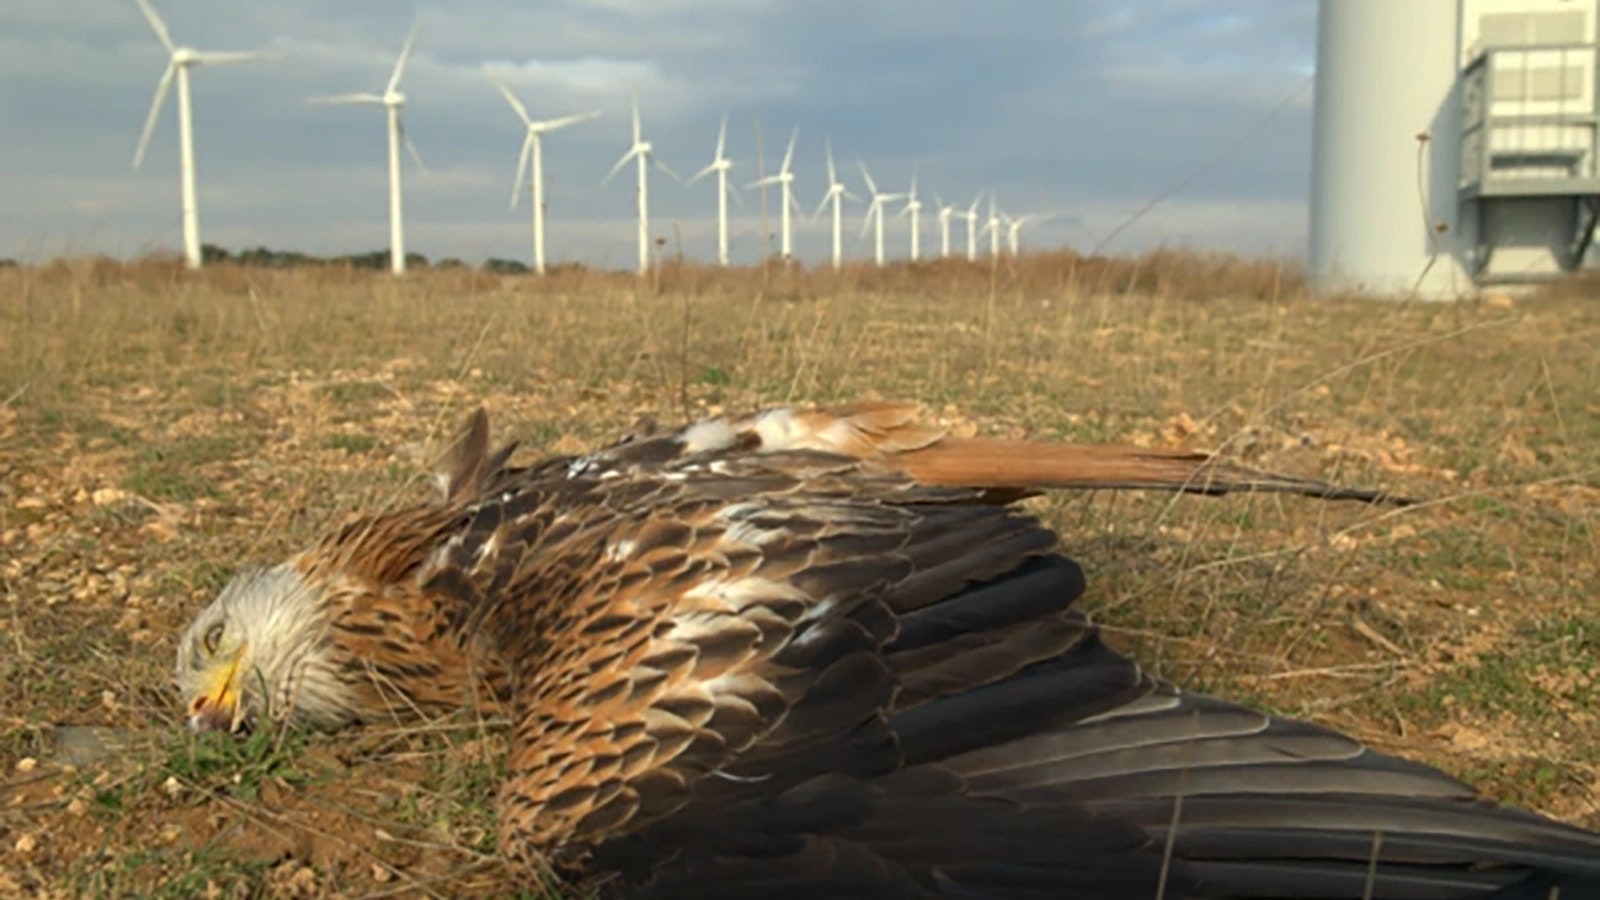 A California long-range hunter says wind turbines can be so deadly he calls them "Cuisinart mixers for birds."